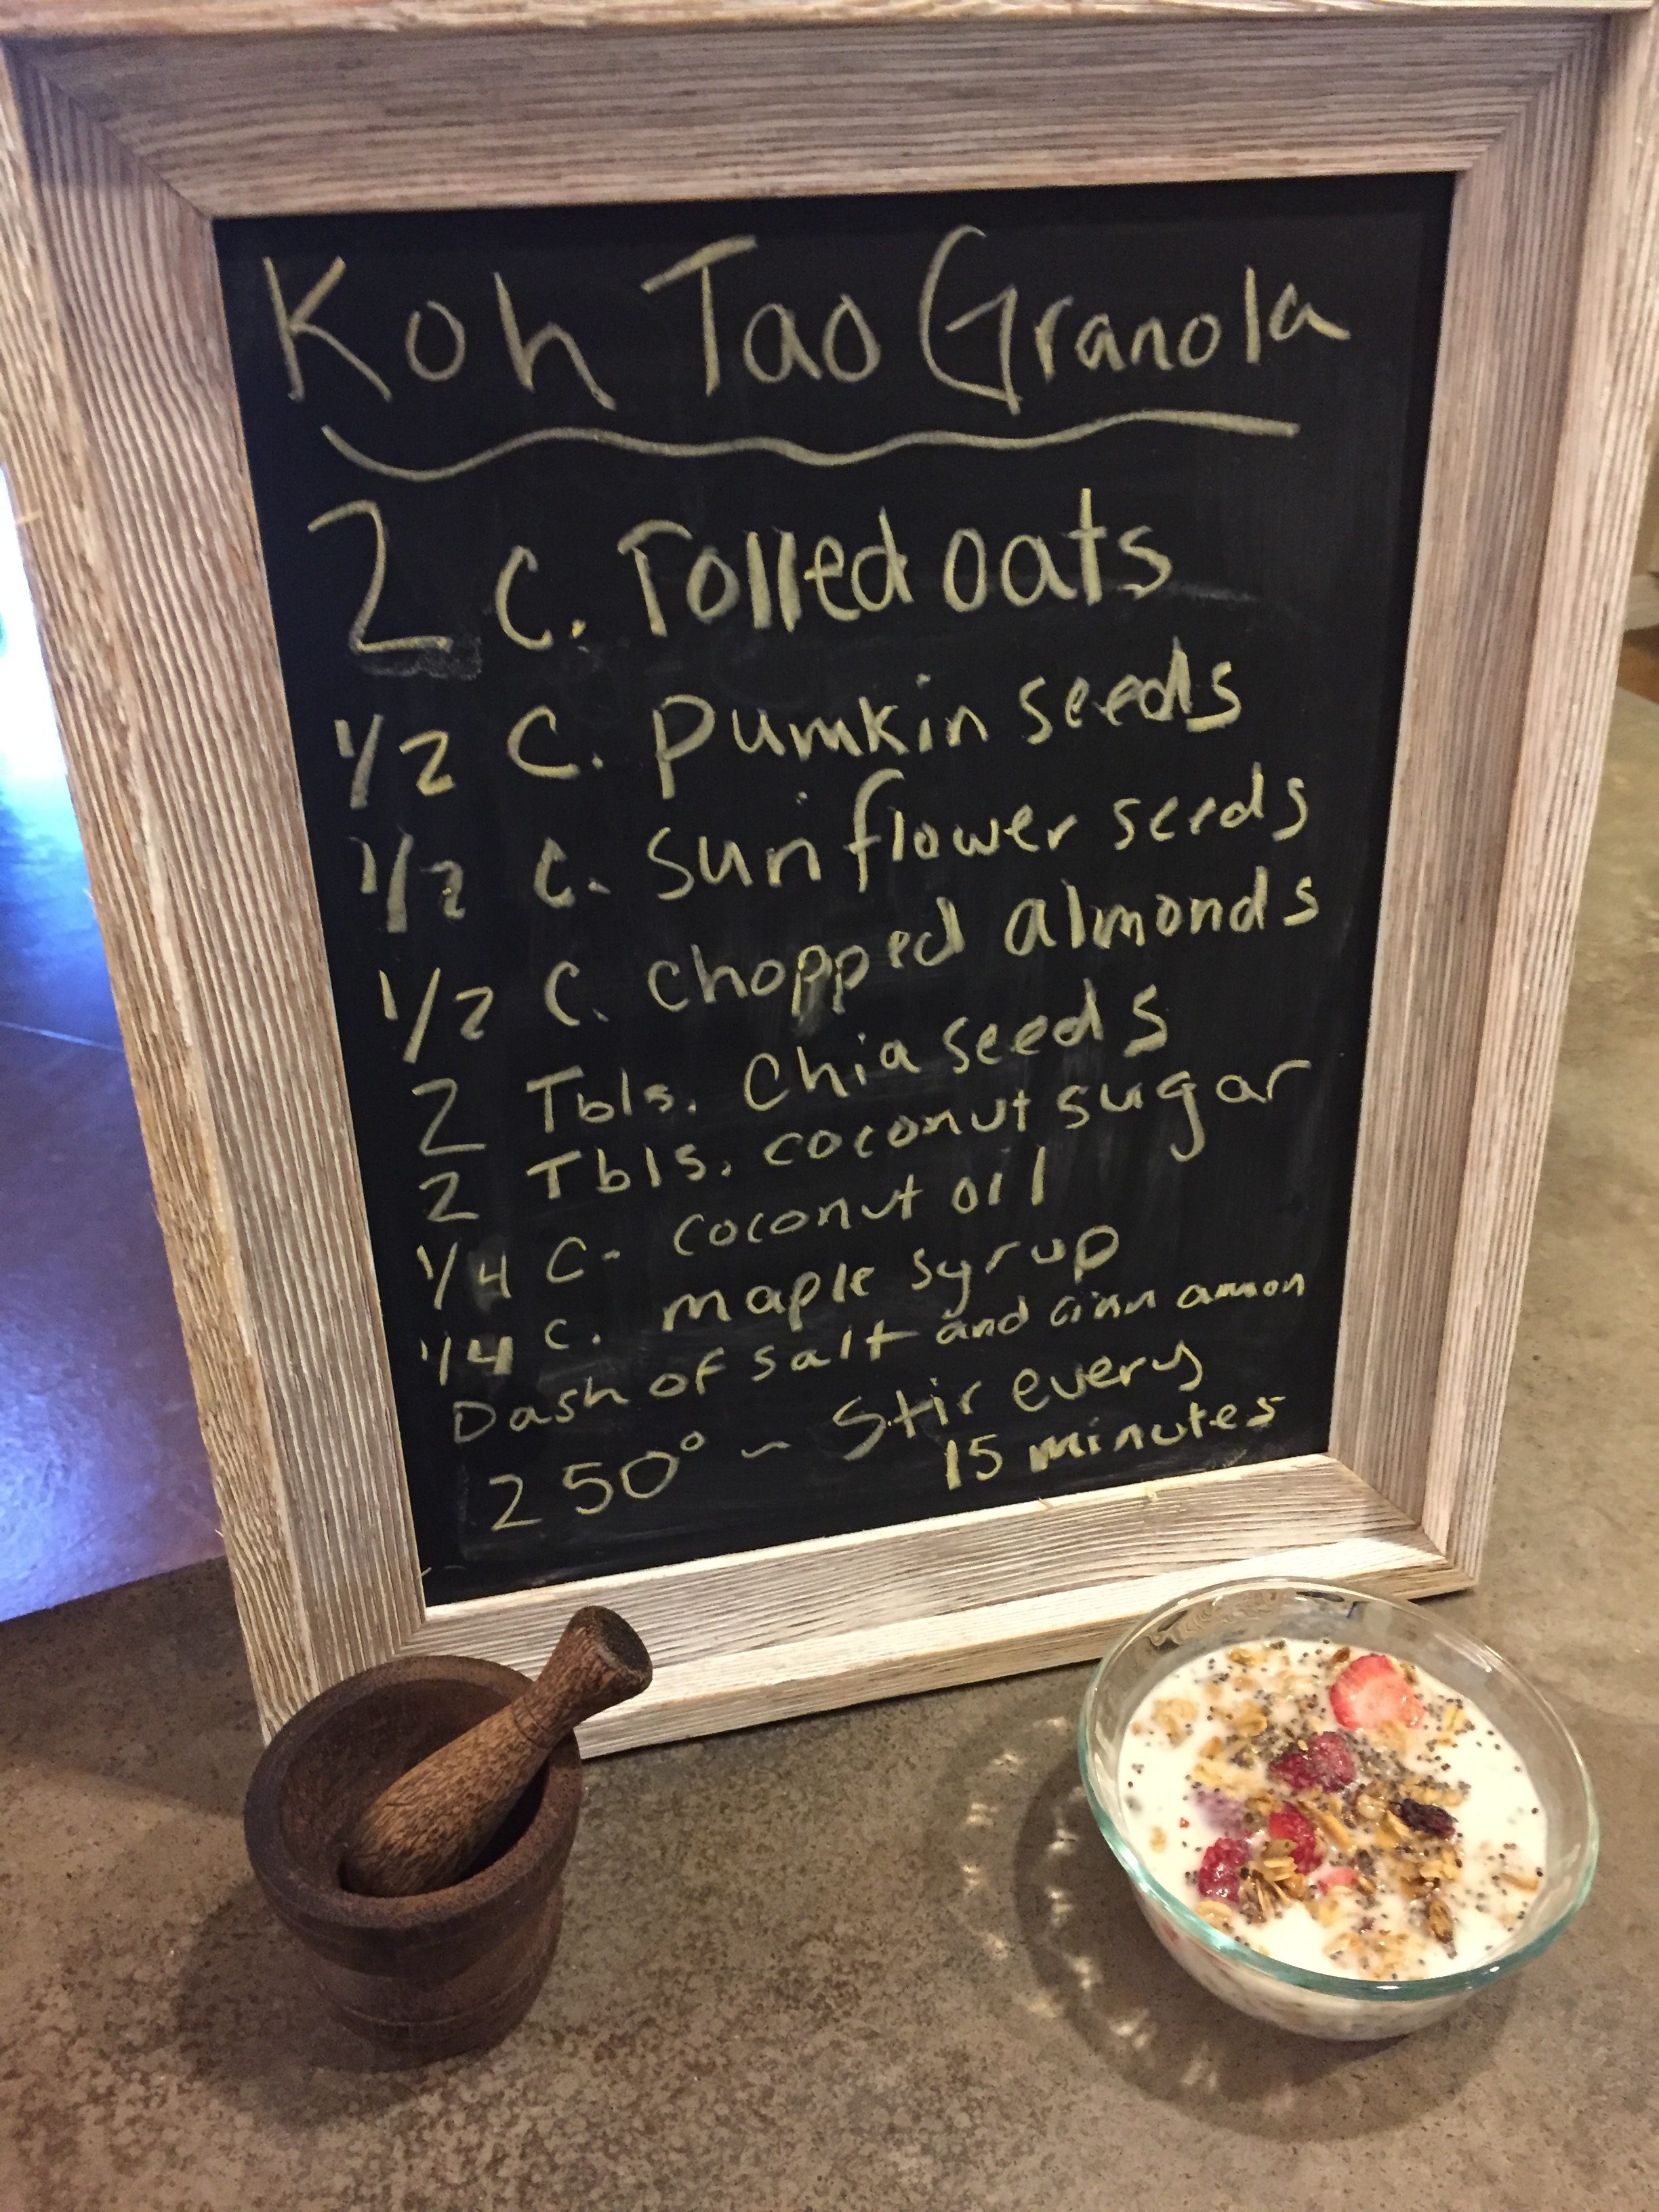 While traveling in Koh Tao Thailand I ate the yummiest gluten free granola. So I came home and recreated the homemade granola.